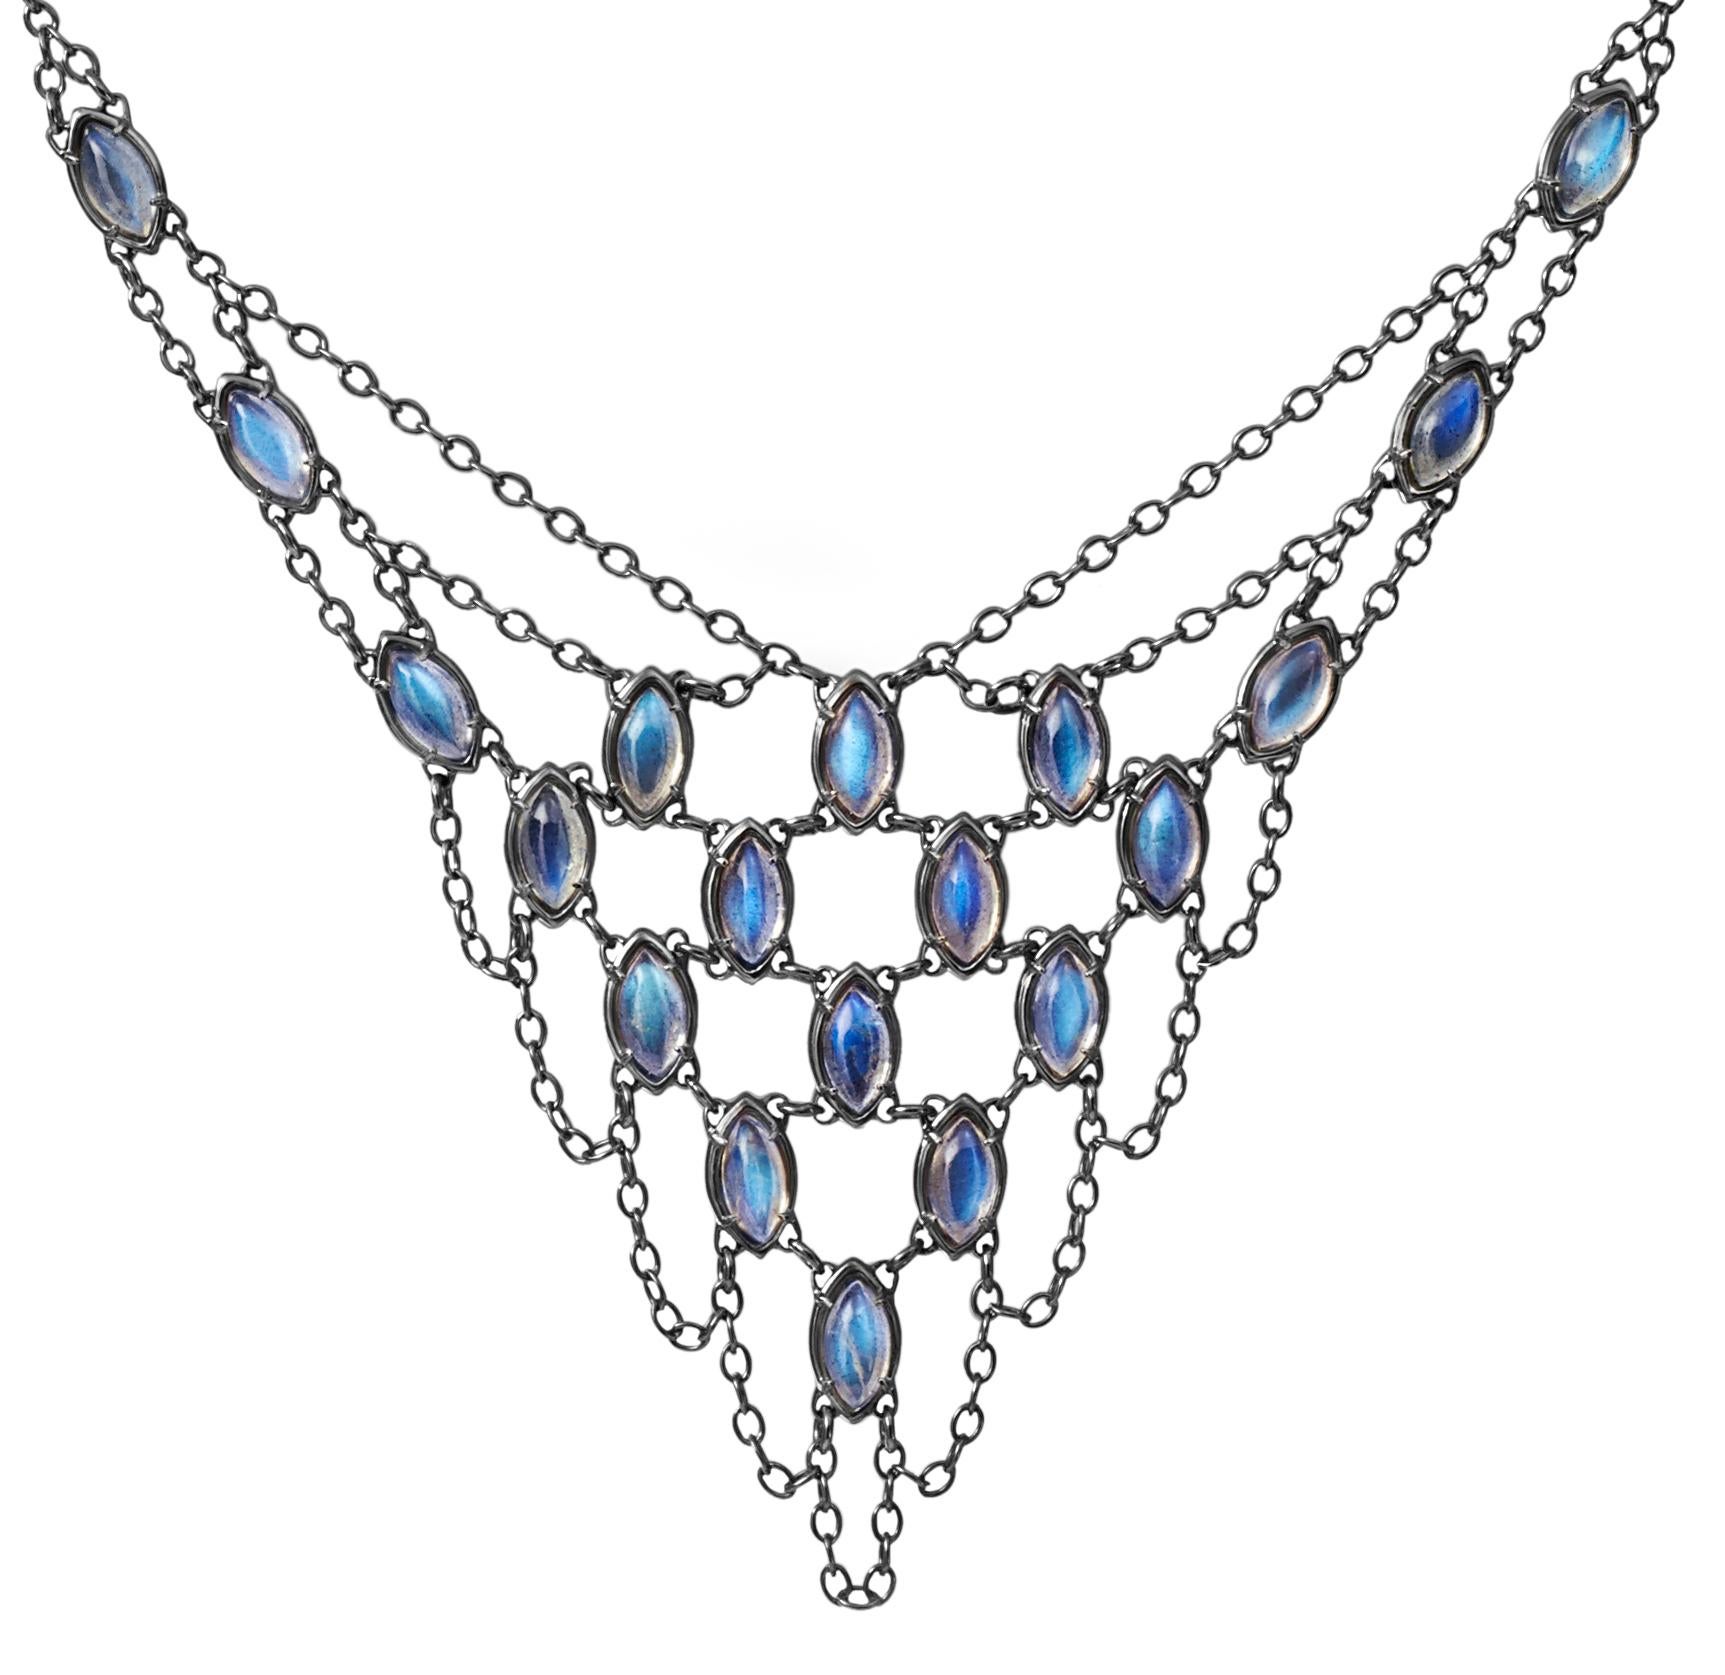 This sultry V shaped necklace consists of luminous labradorite marquise cabochons set into draping mesh chain. 
The feel of this sterling silver necklace is both elegant and sexy and can be positioned on the décolletage according to neckline of your